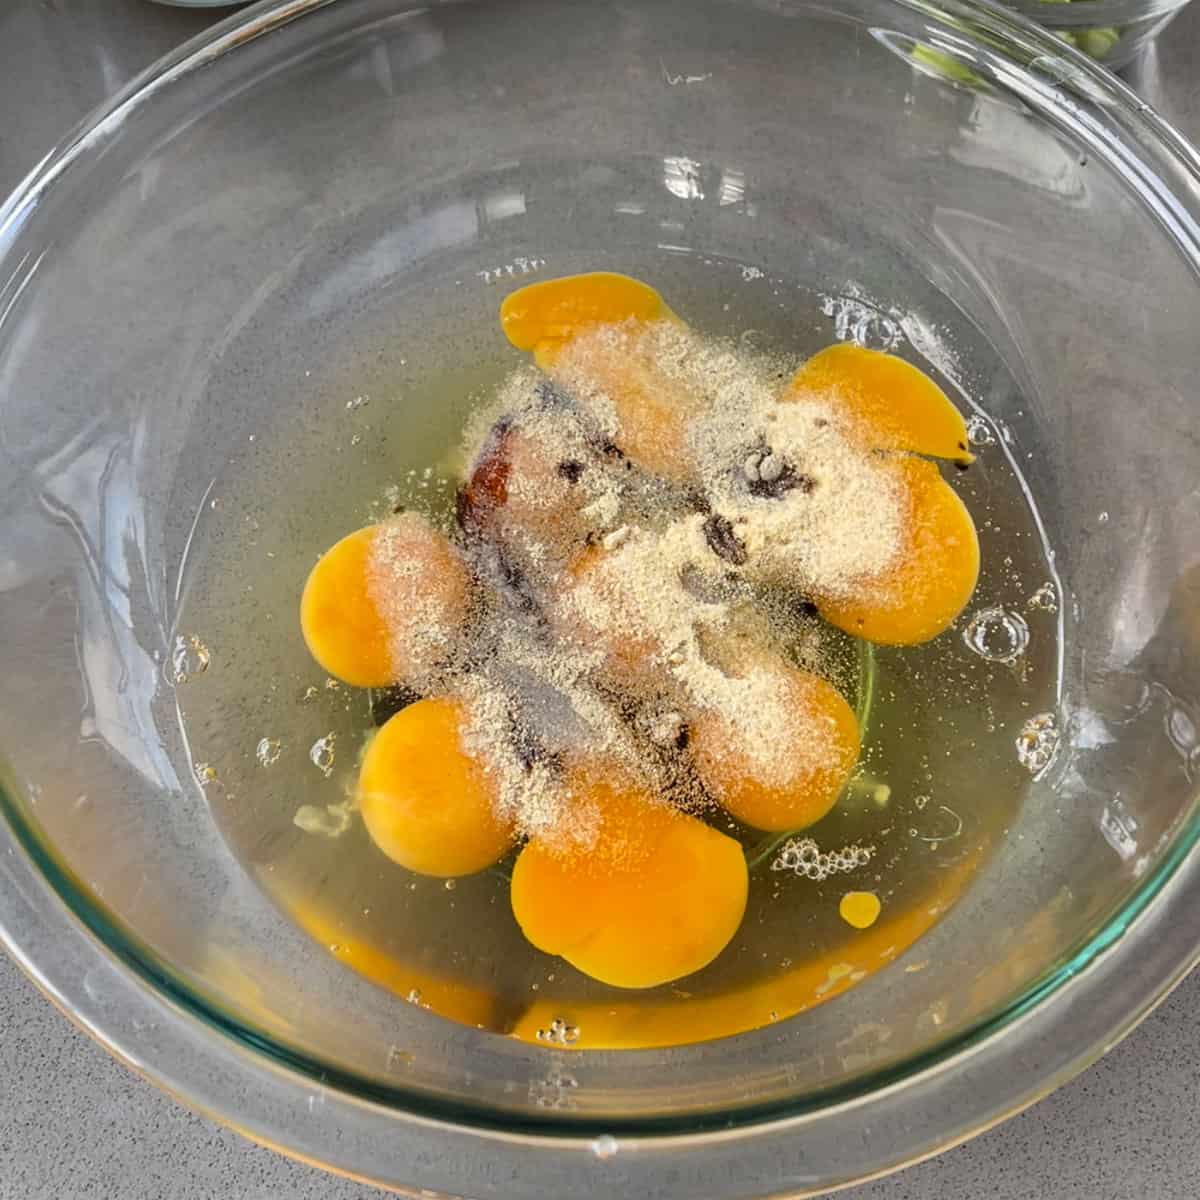 Raw eggs and spices in a glass bowl